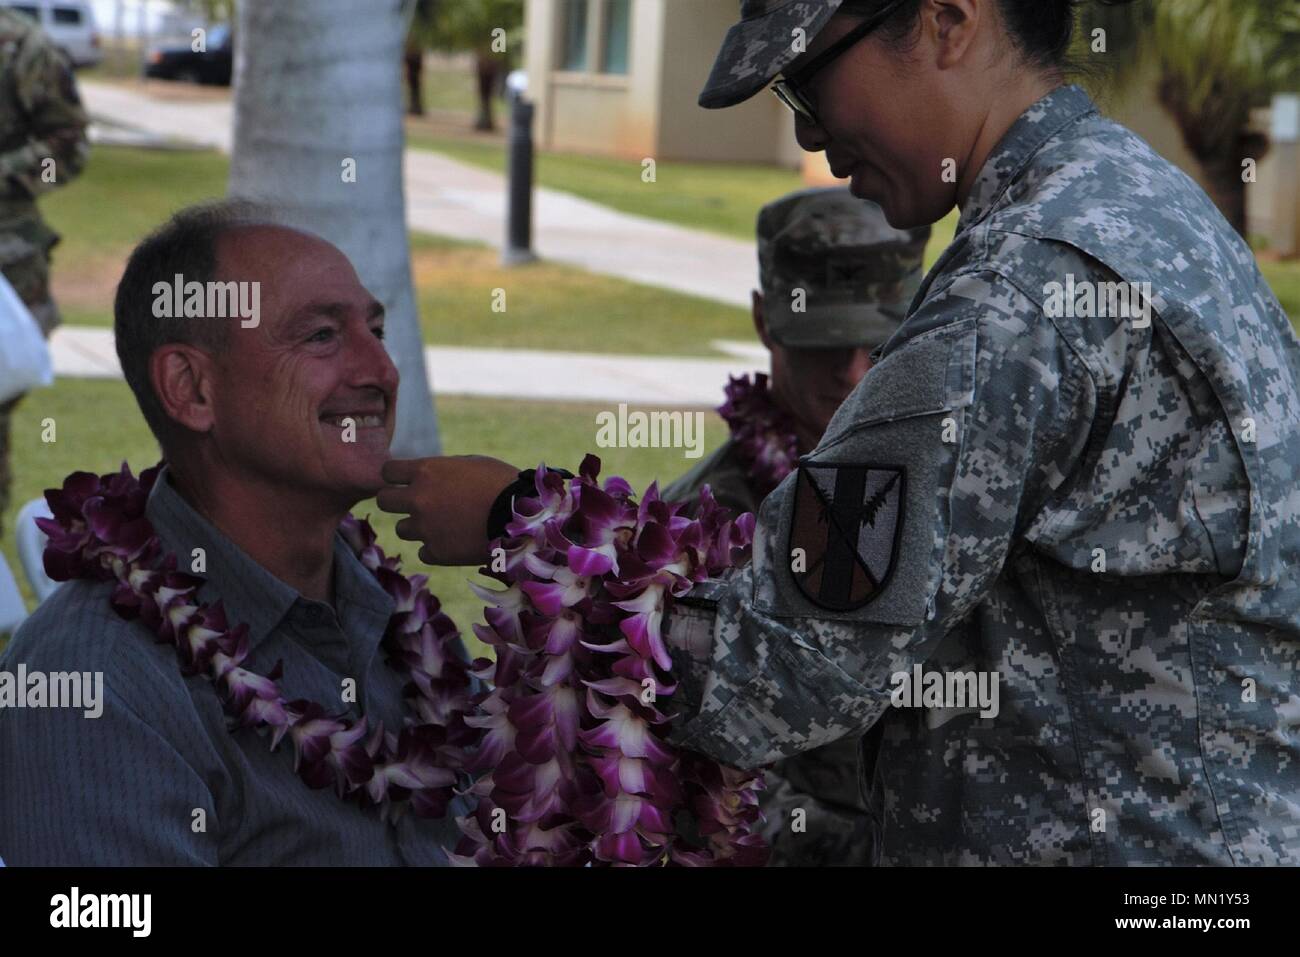 Retired U.S. Army Reserve Col. Randy Hart is presented a flower lei by Cadet Melissa Tran, a Reserve Officer Training Corps cadet from the University of Hawaii at Manoa, during an inactivation ceremony held for the 63rd Brigade Support Battalion at Fort Shafter Flats, Honolulu, Aug. 06, 2017. Hart attended the ceremony as the guest speaker and was the first commander of the 303rd Maneuver Enhancement Brigade, who activated the 303rd MEB and 63rd BSB in 2011. Stock Photo